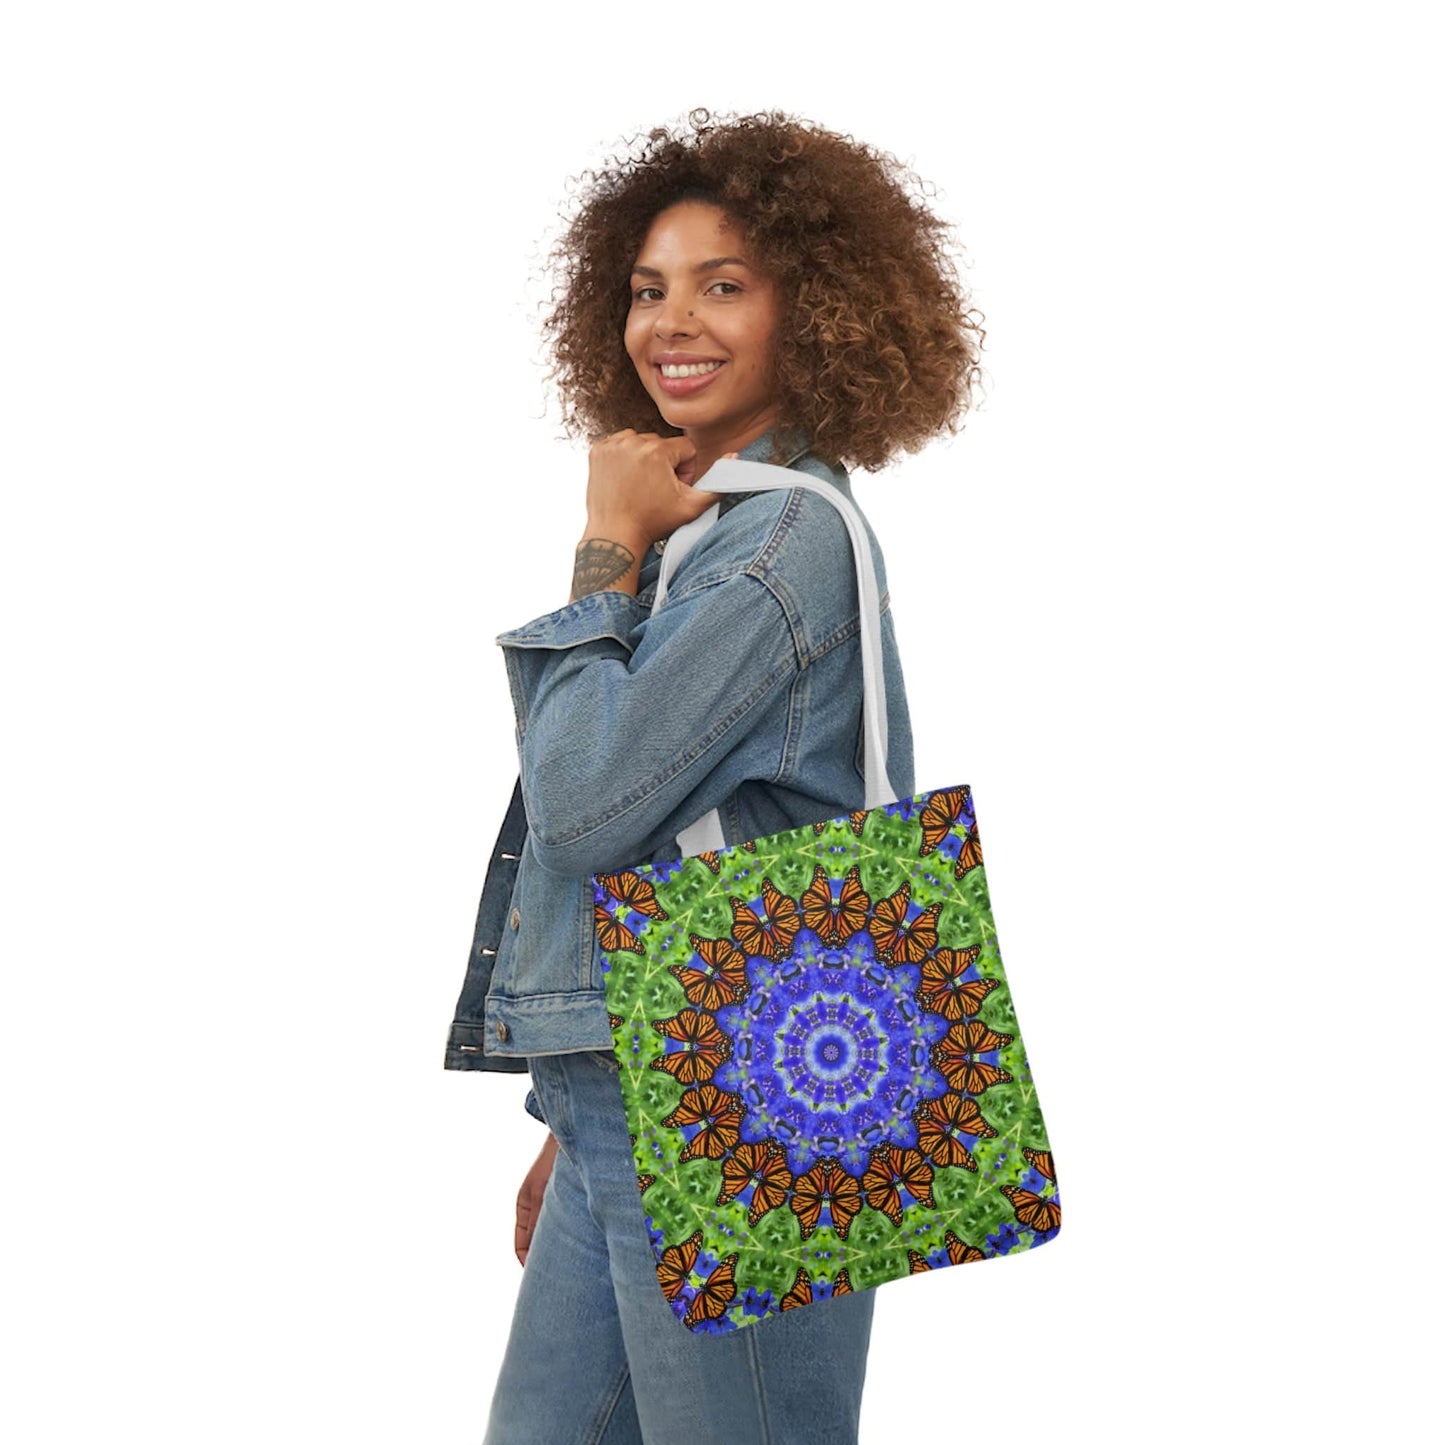 Cute Canvas Butterfly Art Tote Bag - Vibrant Mandala Art for Everyday Style Altruistic Aura